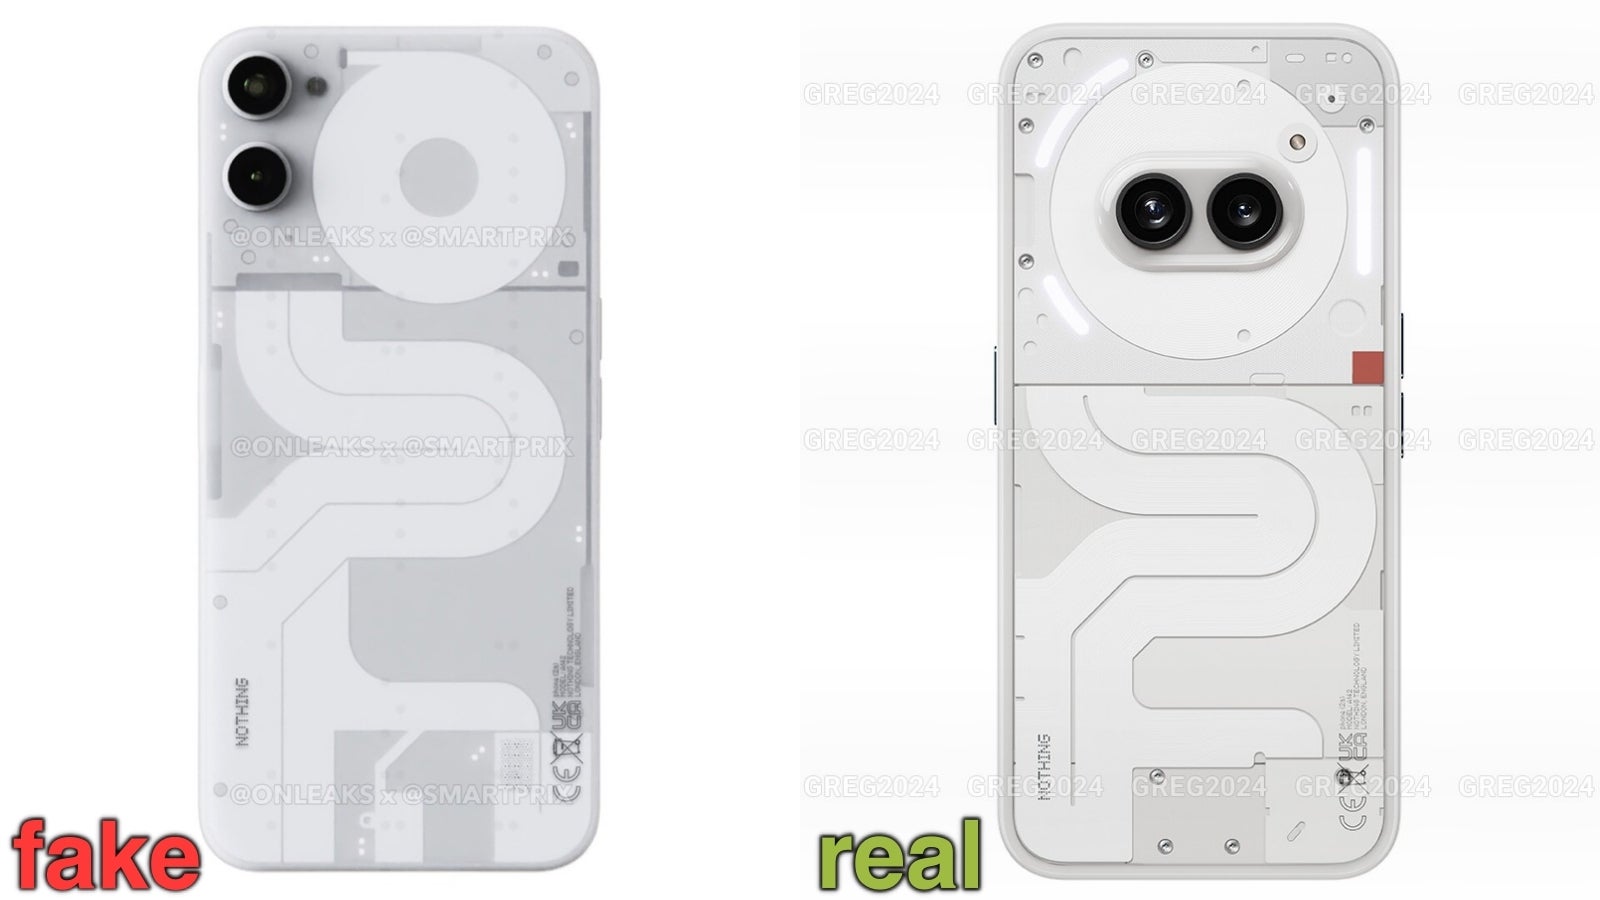 Official Nothing Phone 2a renders (right) were leaked on Nothing&amp;rsquo;s forum, confirming the design leak we got earlier (left) was fake. - Nothing Phone 2a: Carl Pei’s masterclass in “distractingly stunning design” - enough to beat Pixel?